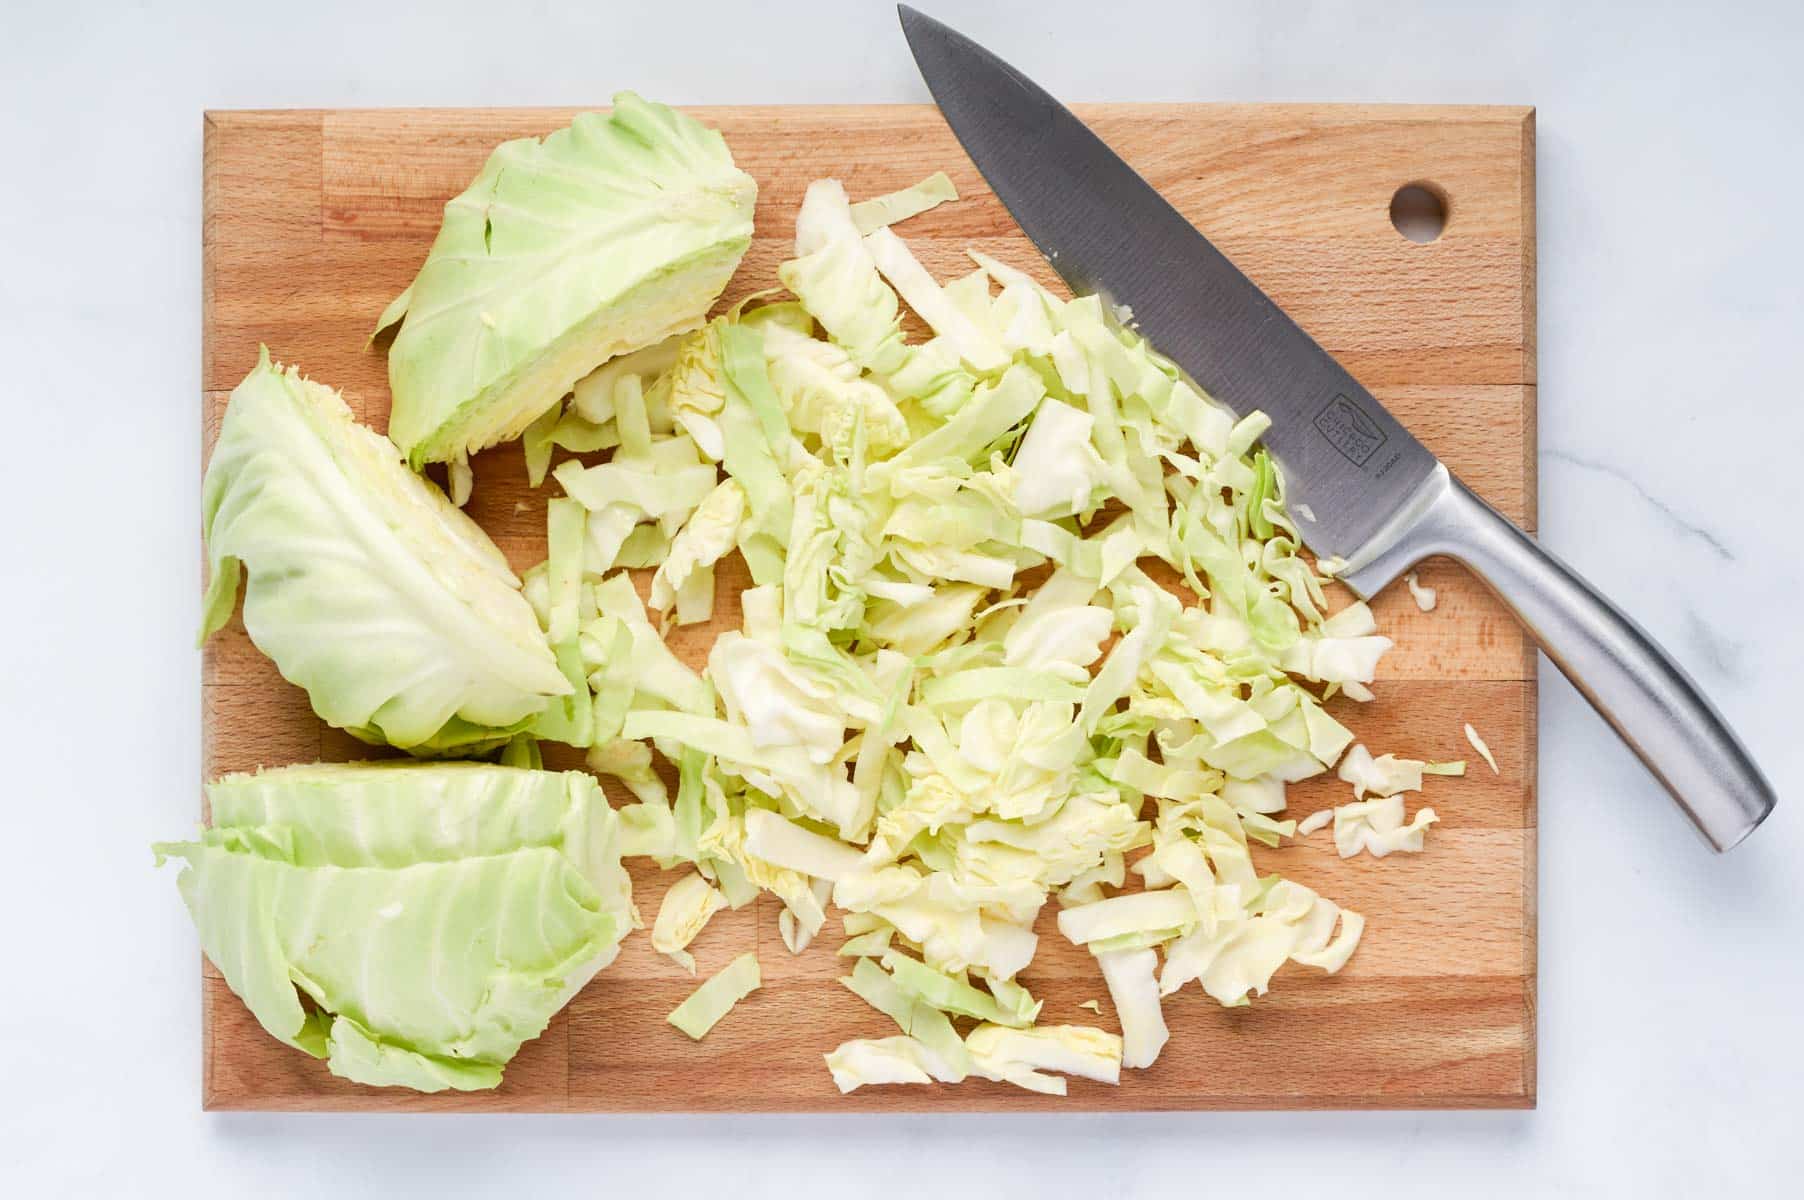 Cabbage is sliced thin for this dish.